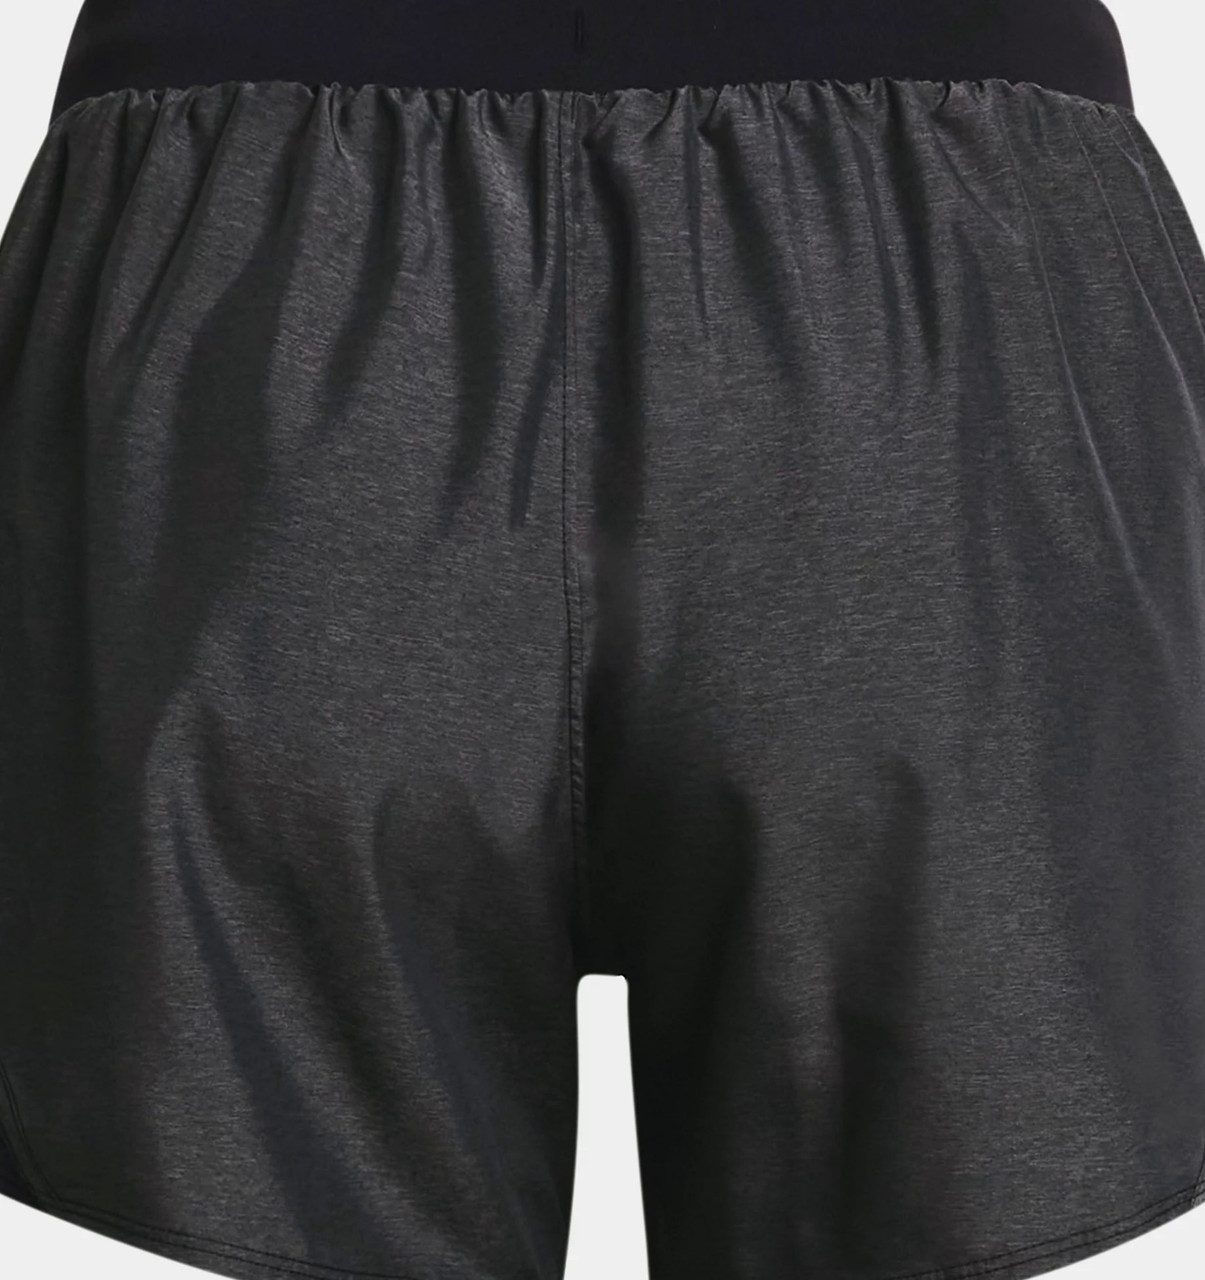 Short Under Armour Fly By 2.0 - Sport Master